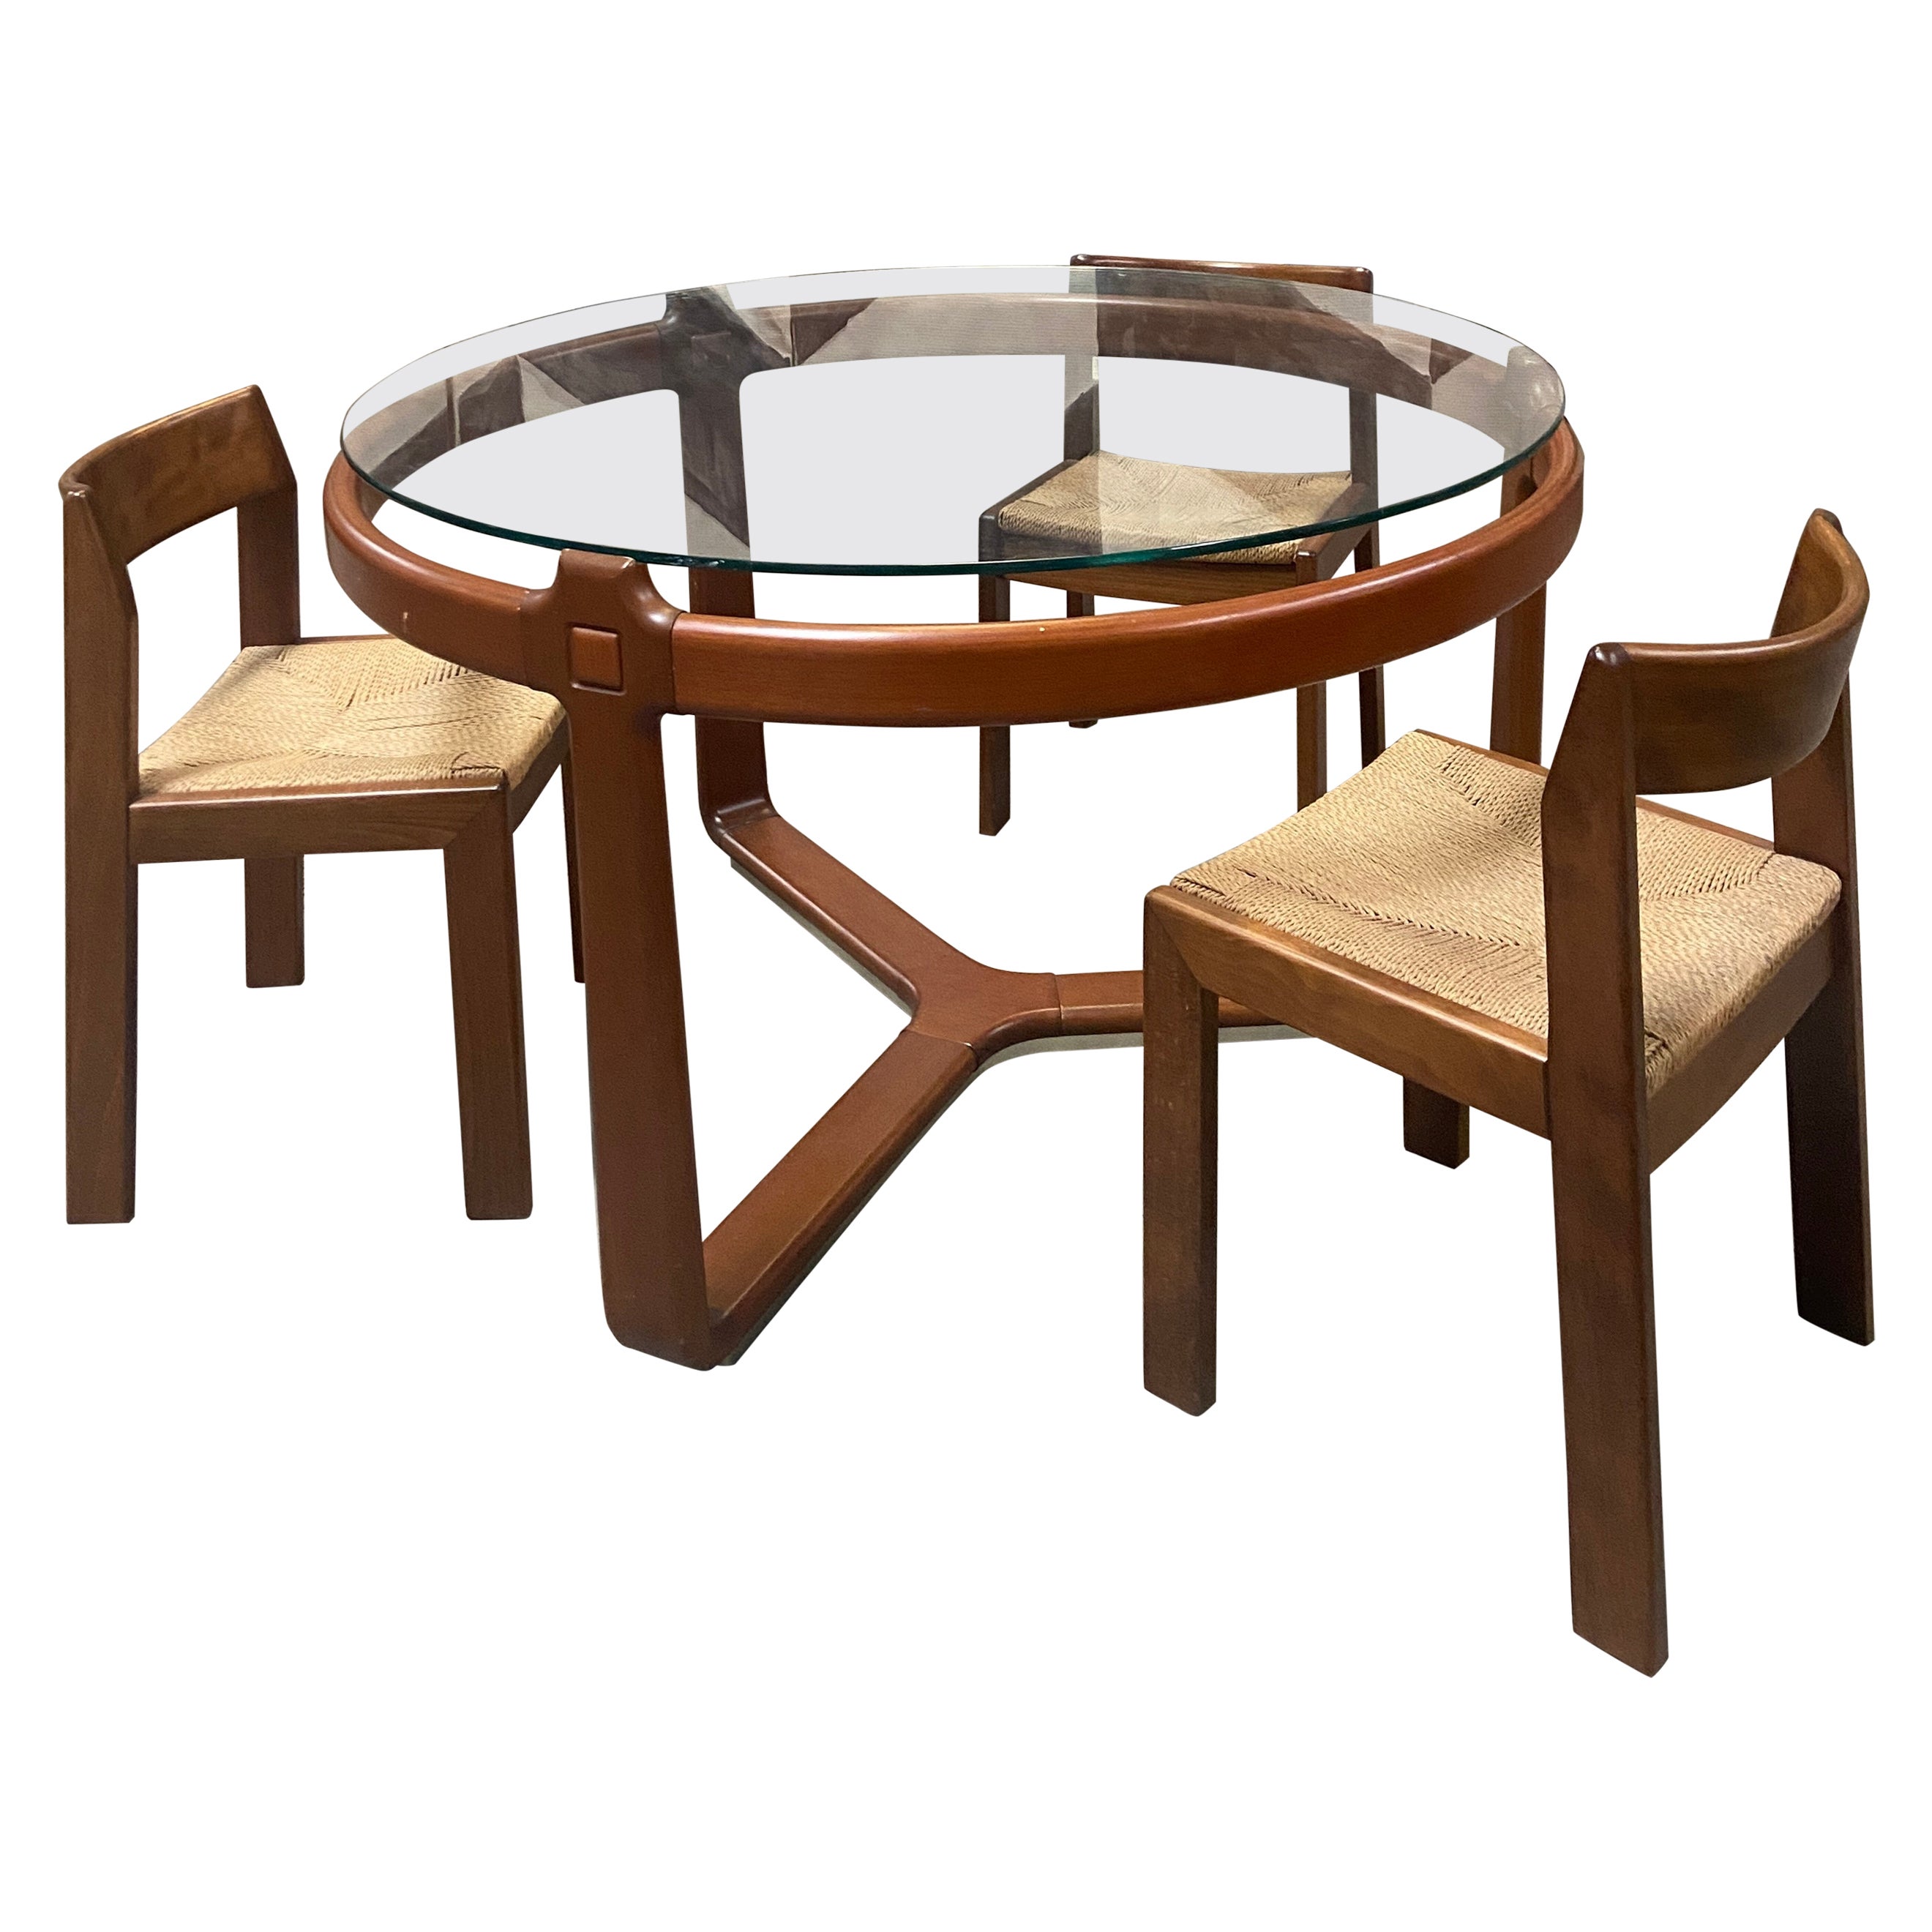 Mid-Century Modern Italian Round Table with Smoked Glass Top and 3 Wooden Chairs For Sale